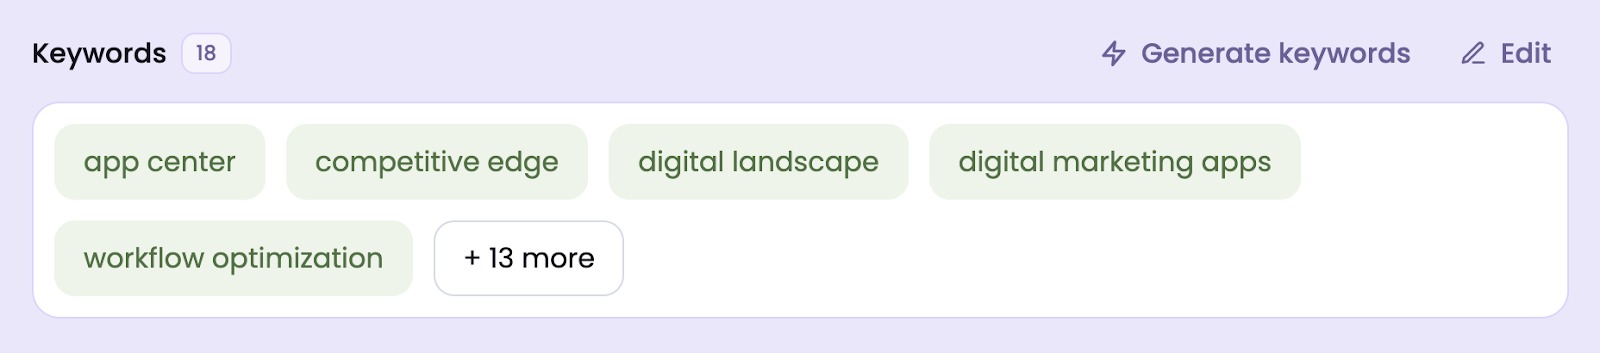 An example of how the generated keywords might look like in the Keywords field.